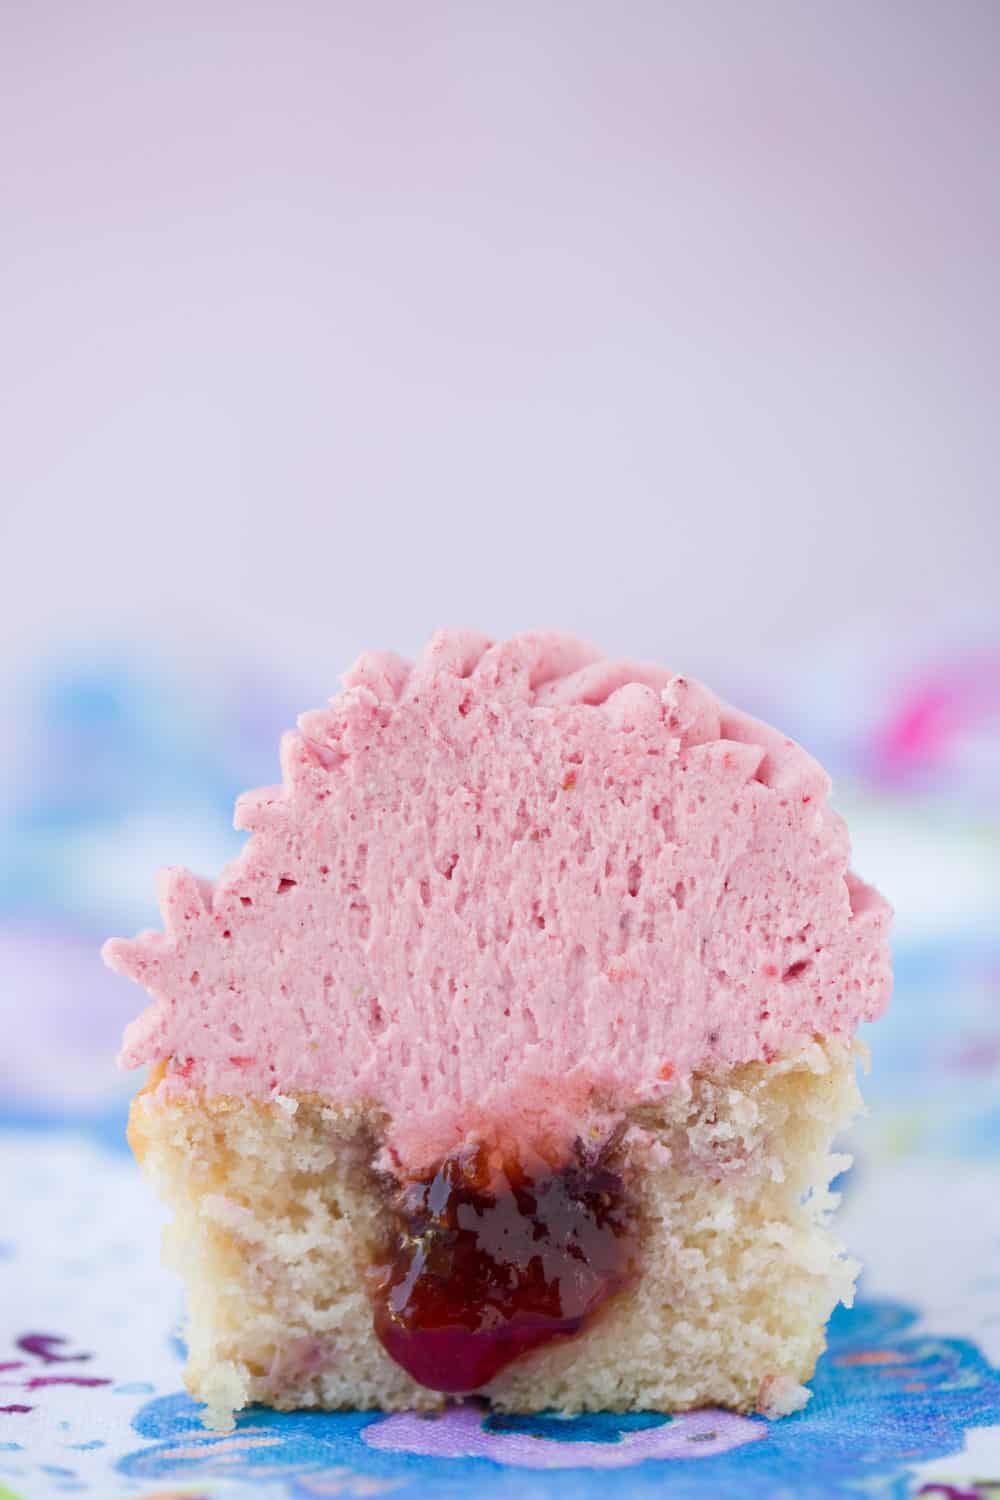 A strawberry cupcake cut in half to show the jelly filling in the centre